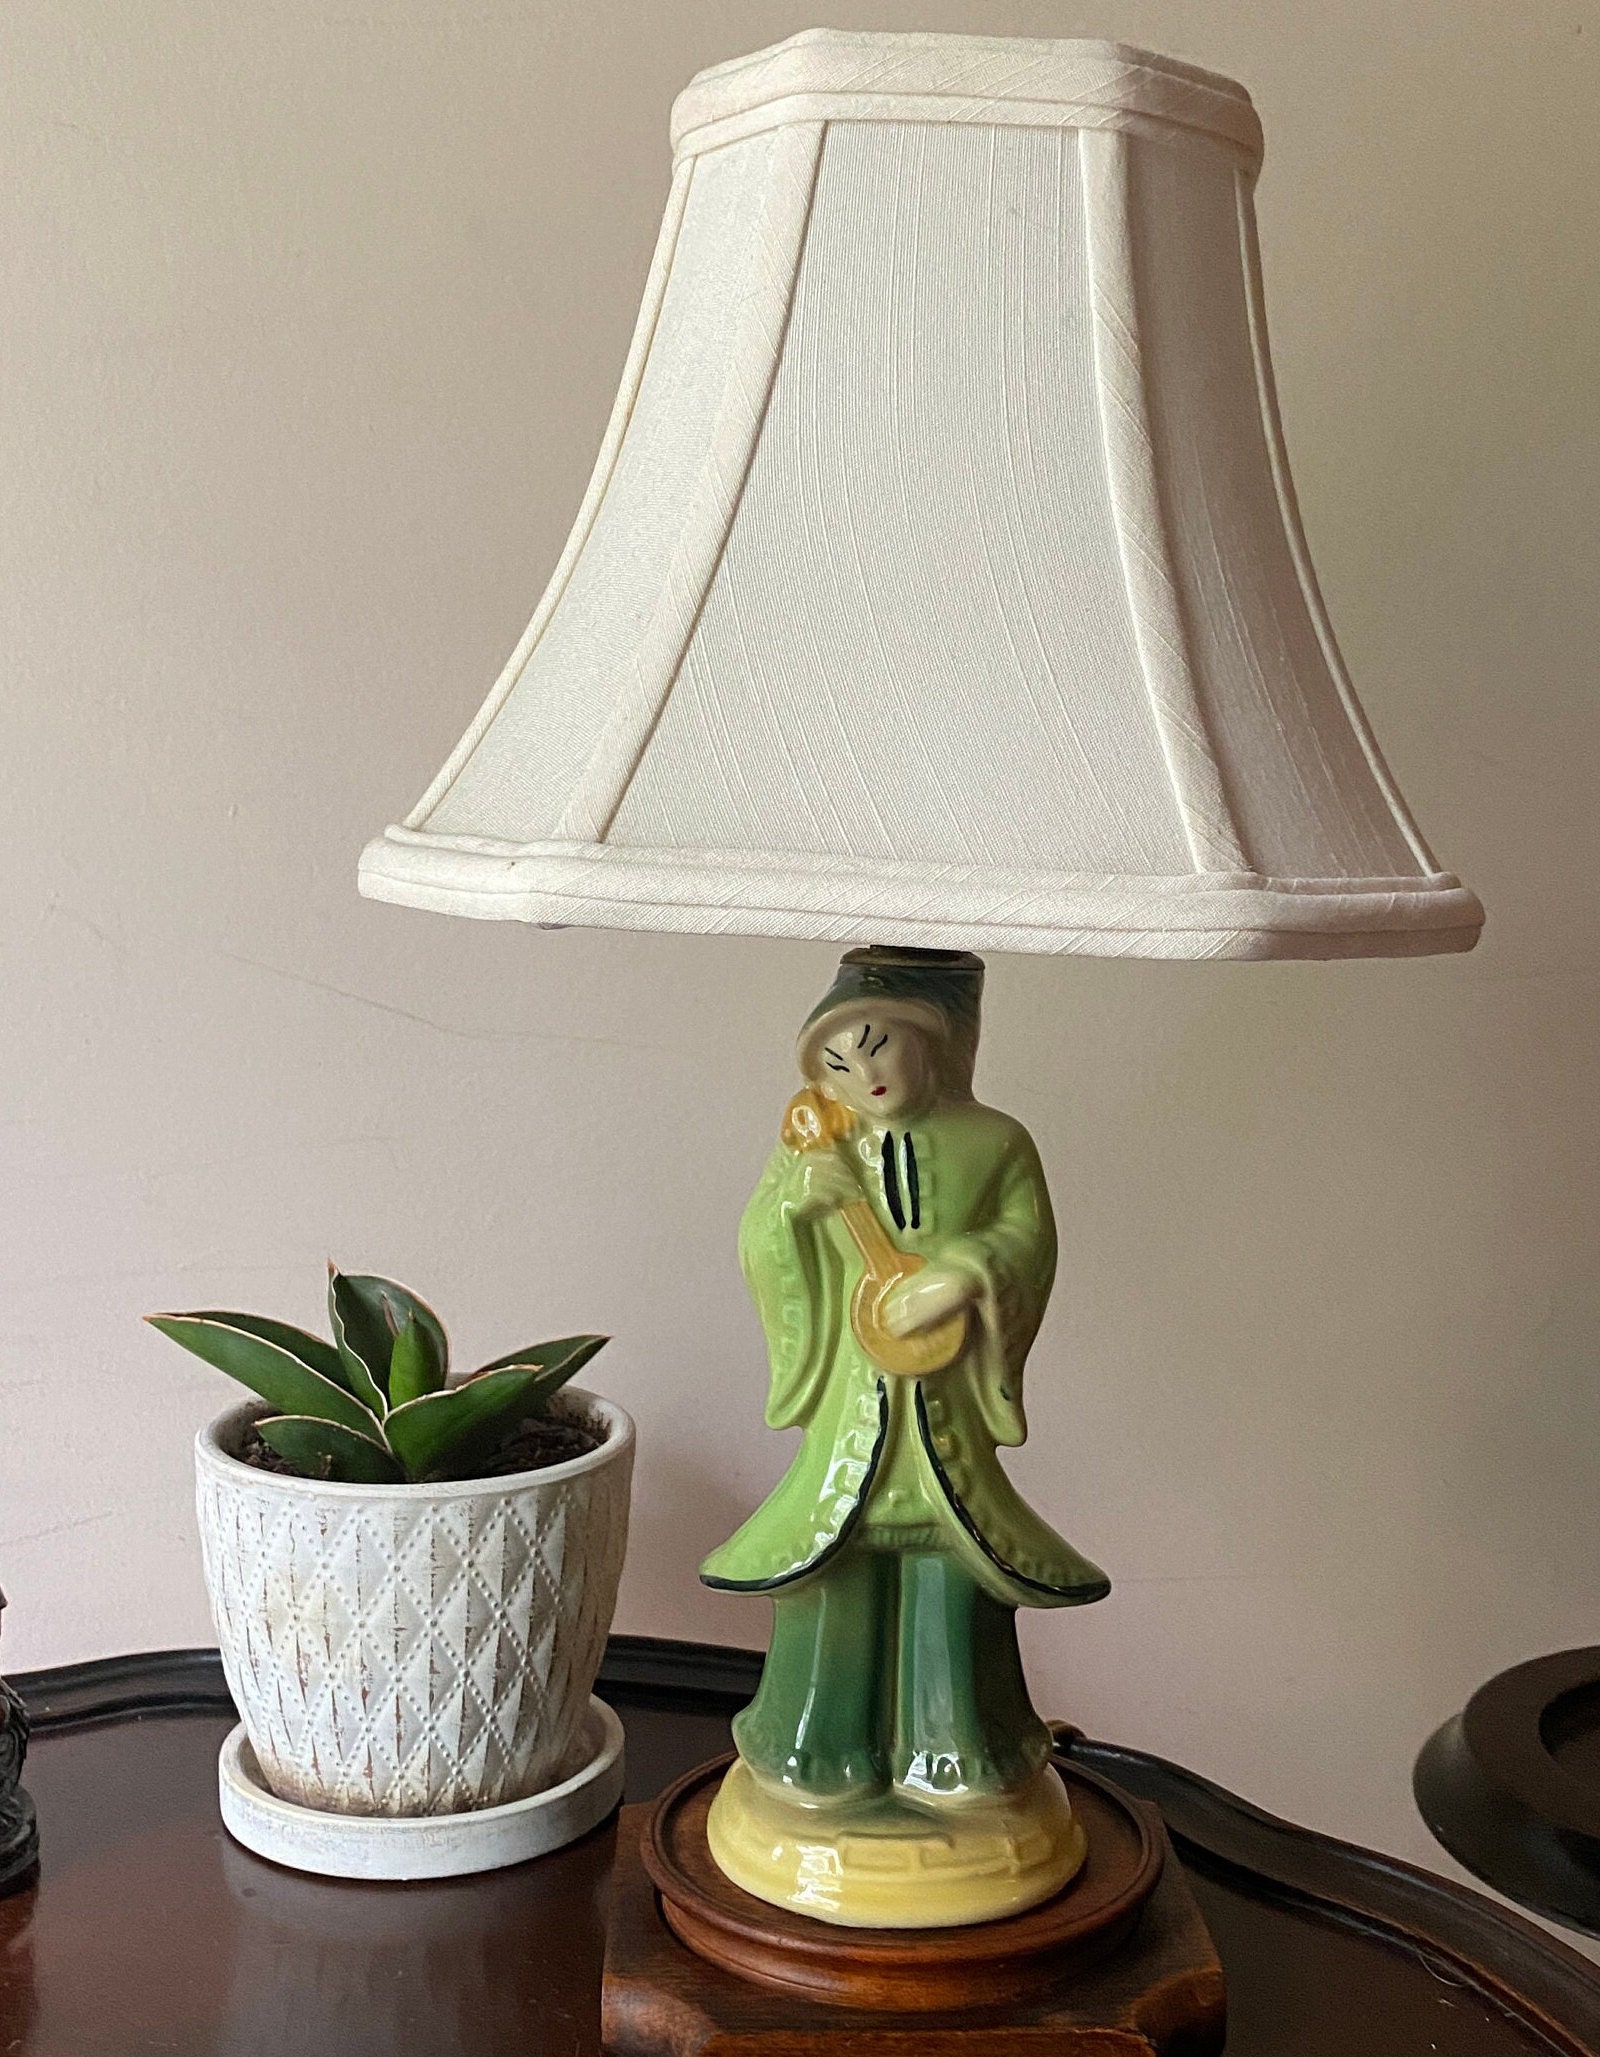 Green Asian Lamp, Vintage Green Gold Lamp, Decorative r Asian Style Lamp  with Green Stone Finial, Asian Eclectic Home Decor Lamp